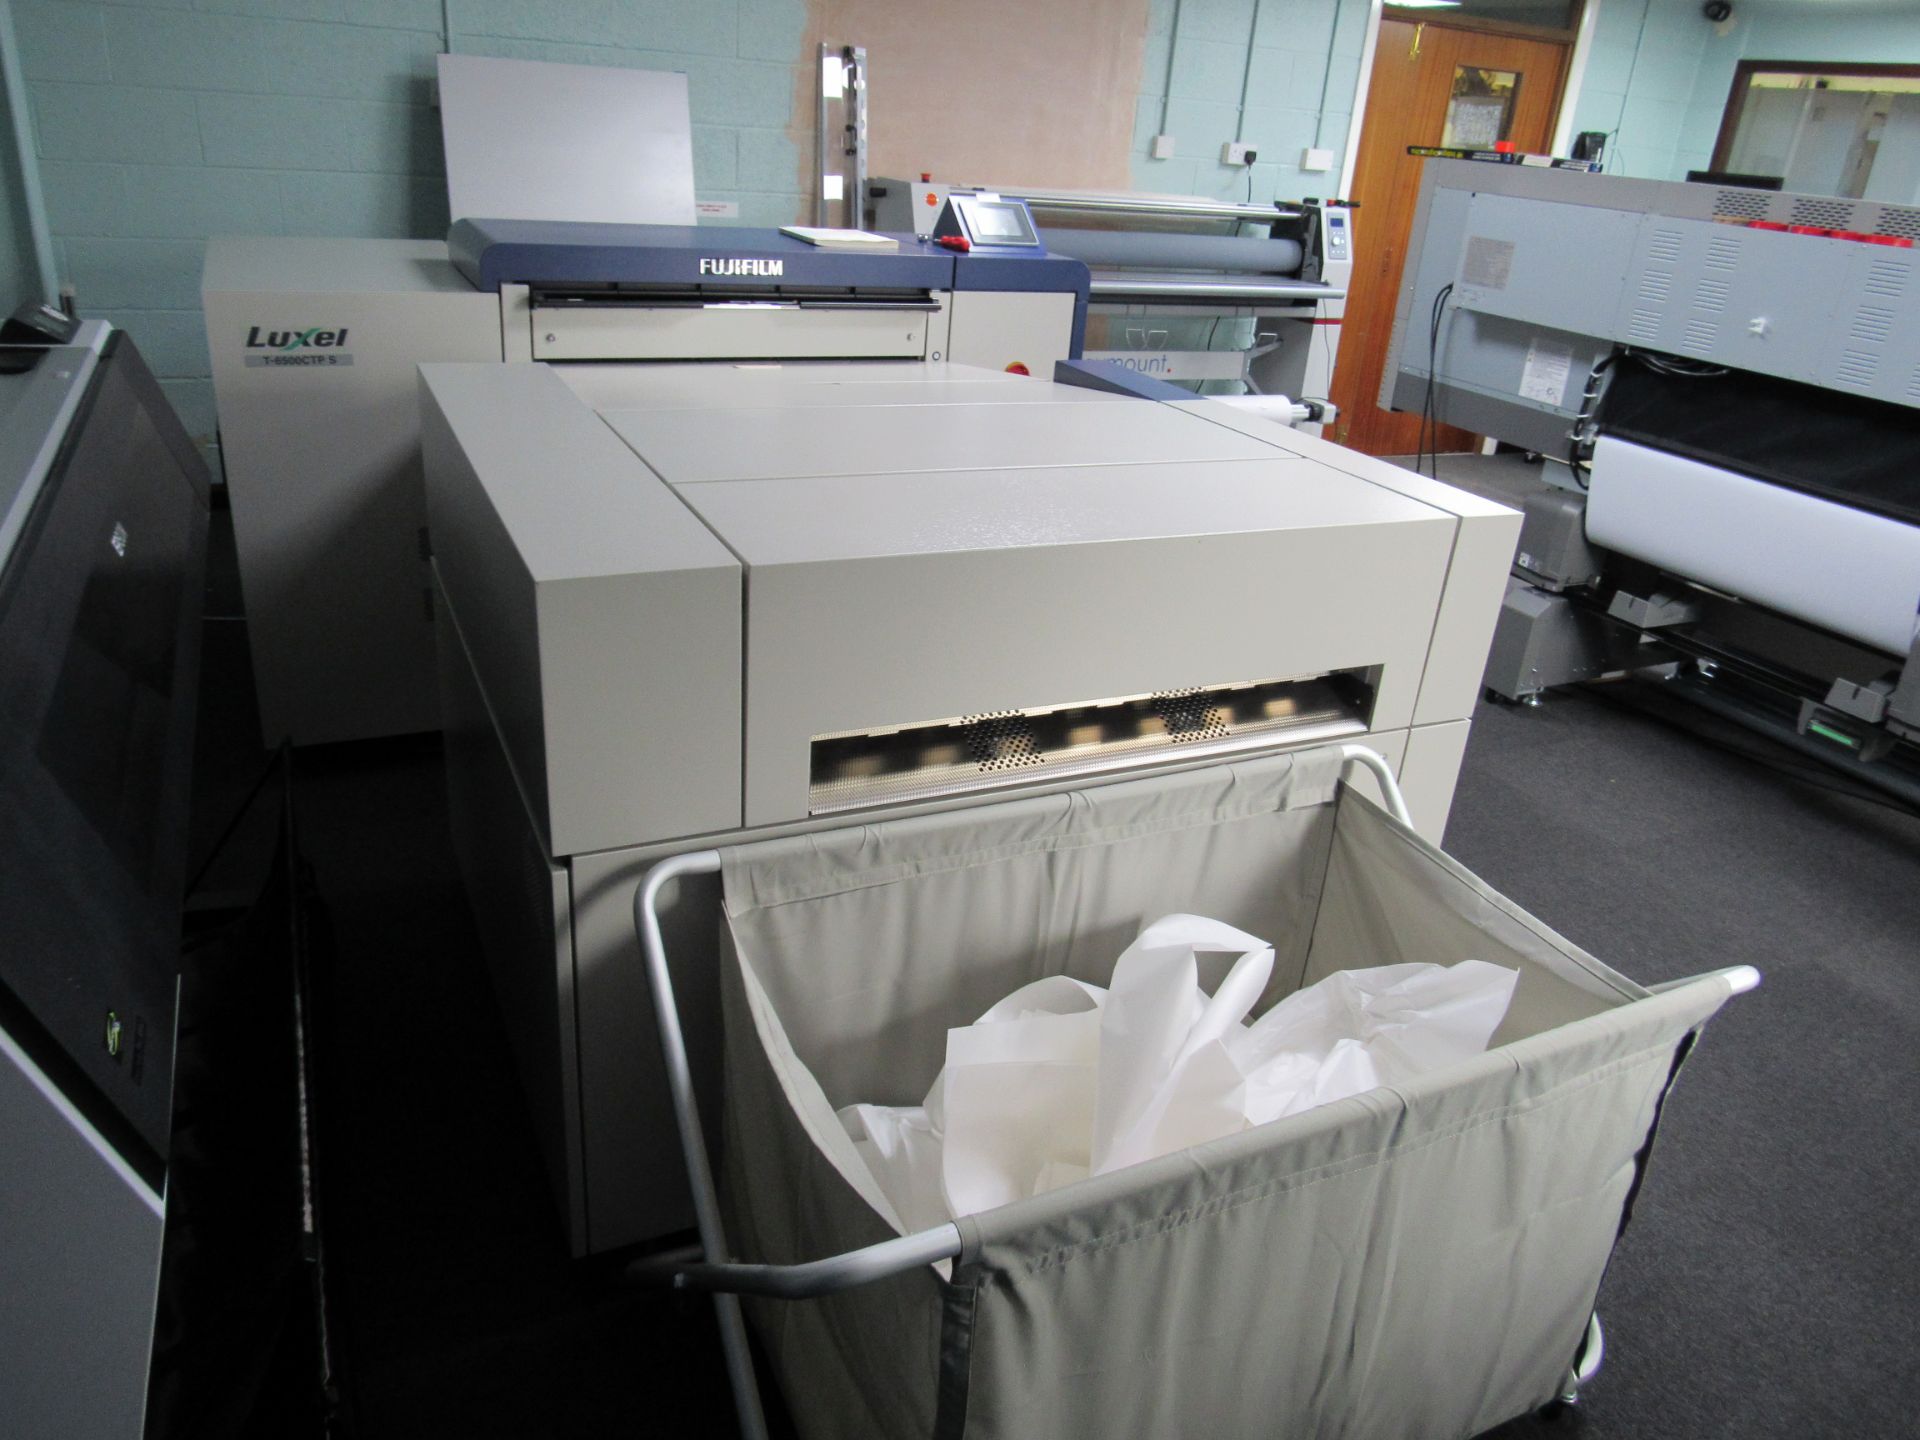 Fujifilm Luxel T-6500CTP - S 21 PPH system compris - Image 13 of 27